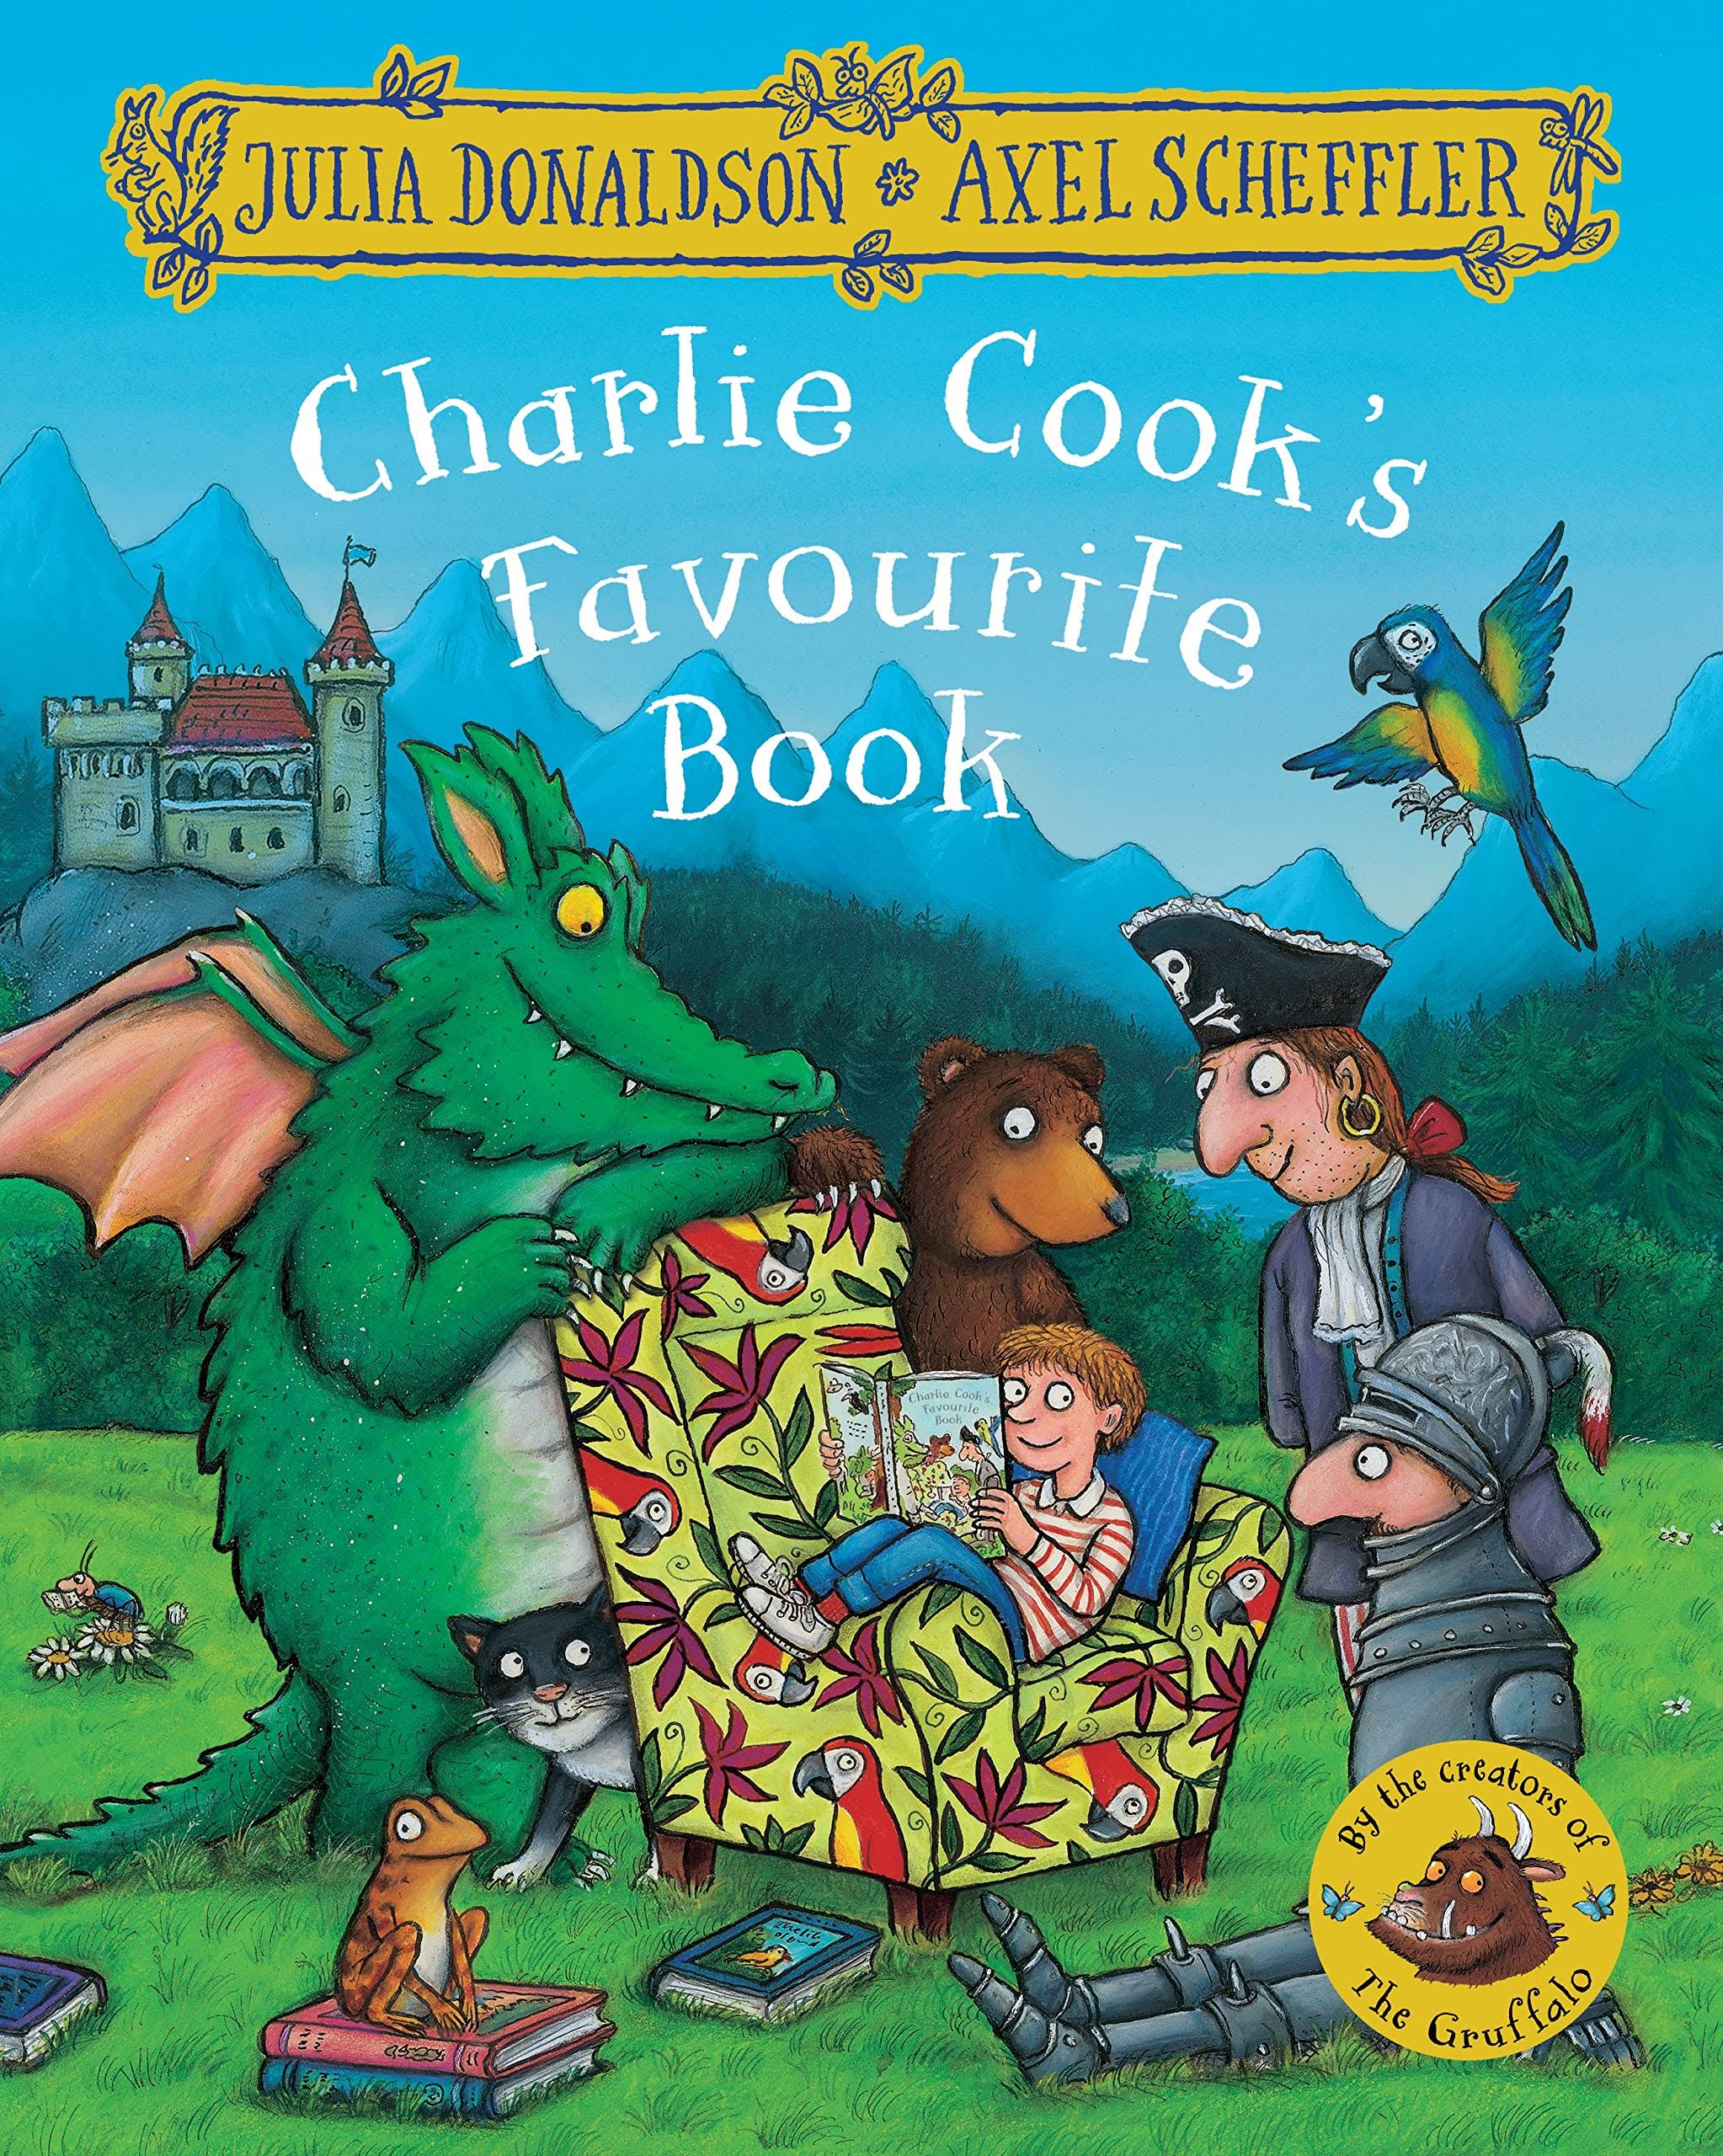 Charlie Cook's Favourite Book [Book]